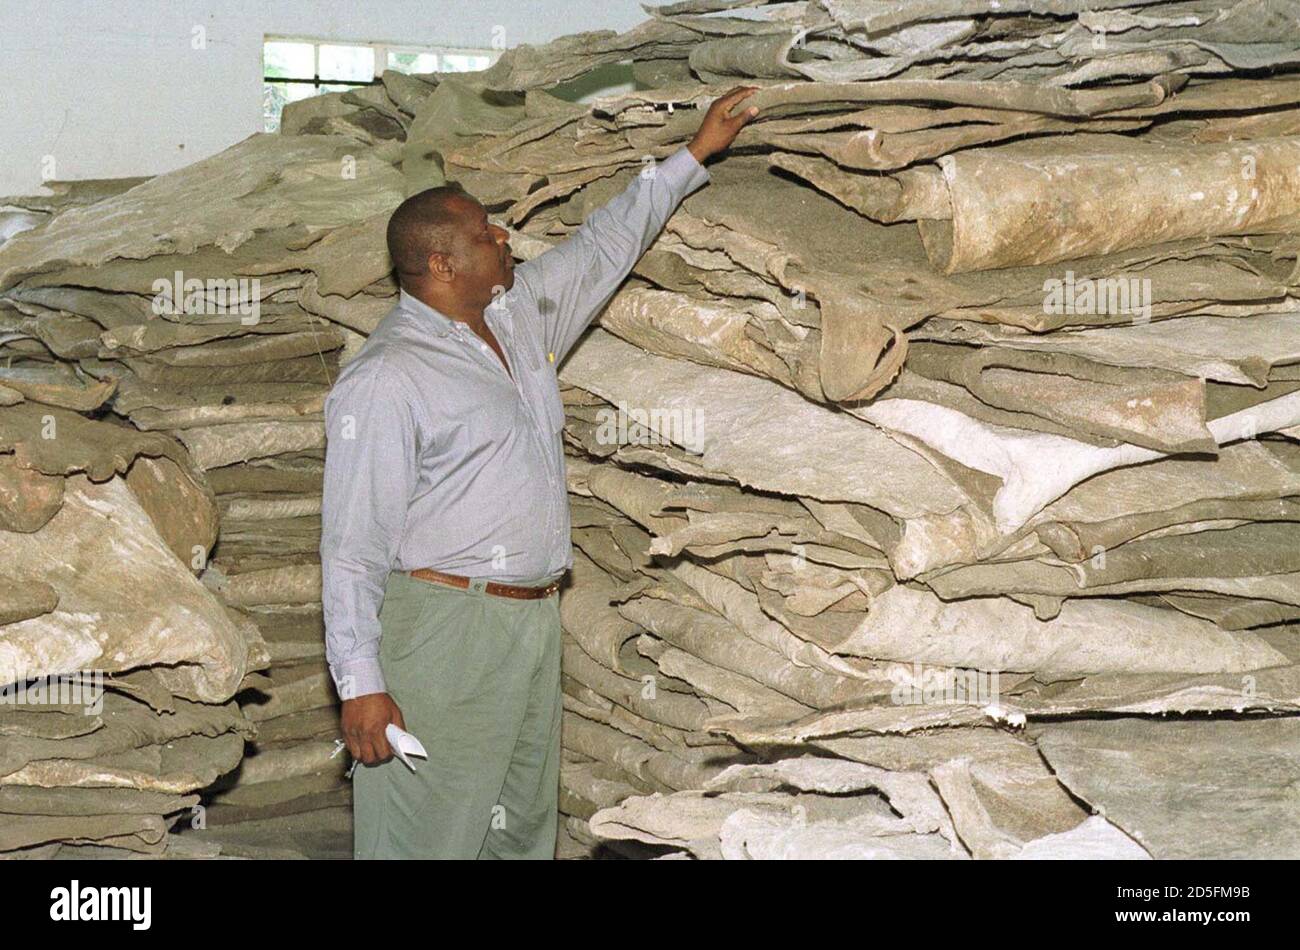 Zimbabwean hide dealer Emmanuel Gwafa inspects a stack of elephant hides prior to their auction at the headquarters of the National Parks December 10. The National Parks were selling off 27 000 Kg's of elephant products to local dealers. The elephant was downlisted from Appendix 1 to Appendix 2 allowing Zimbabwe and Botswana to deal in ivory and elephant products at the 1997 Convention for the International Trade in Endangered Species (CITES) conference.  HB/ME Stock Photo